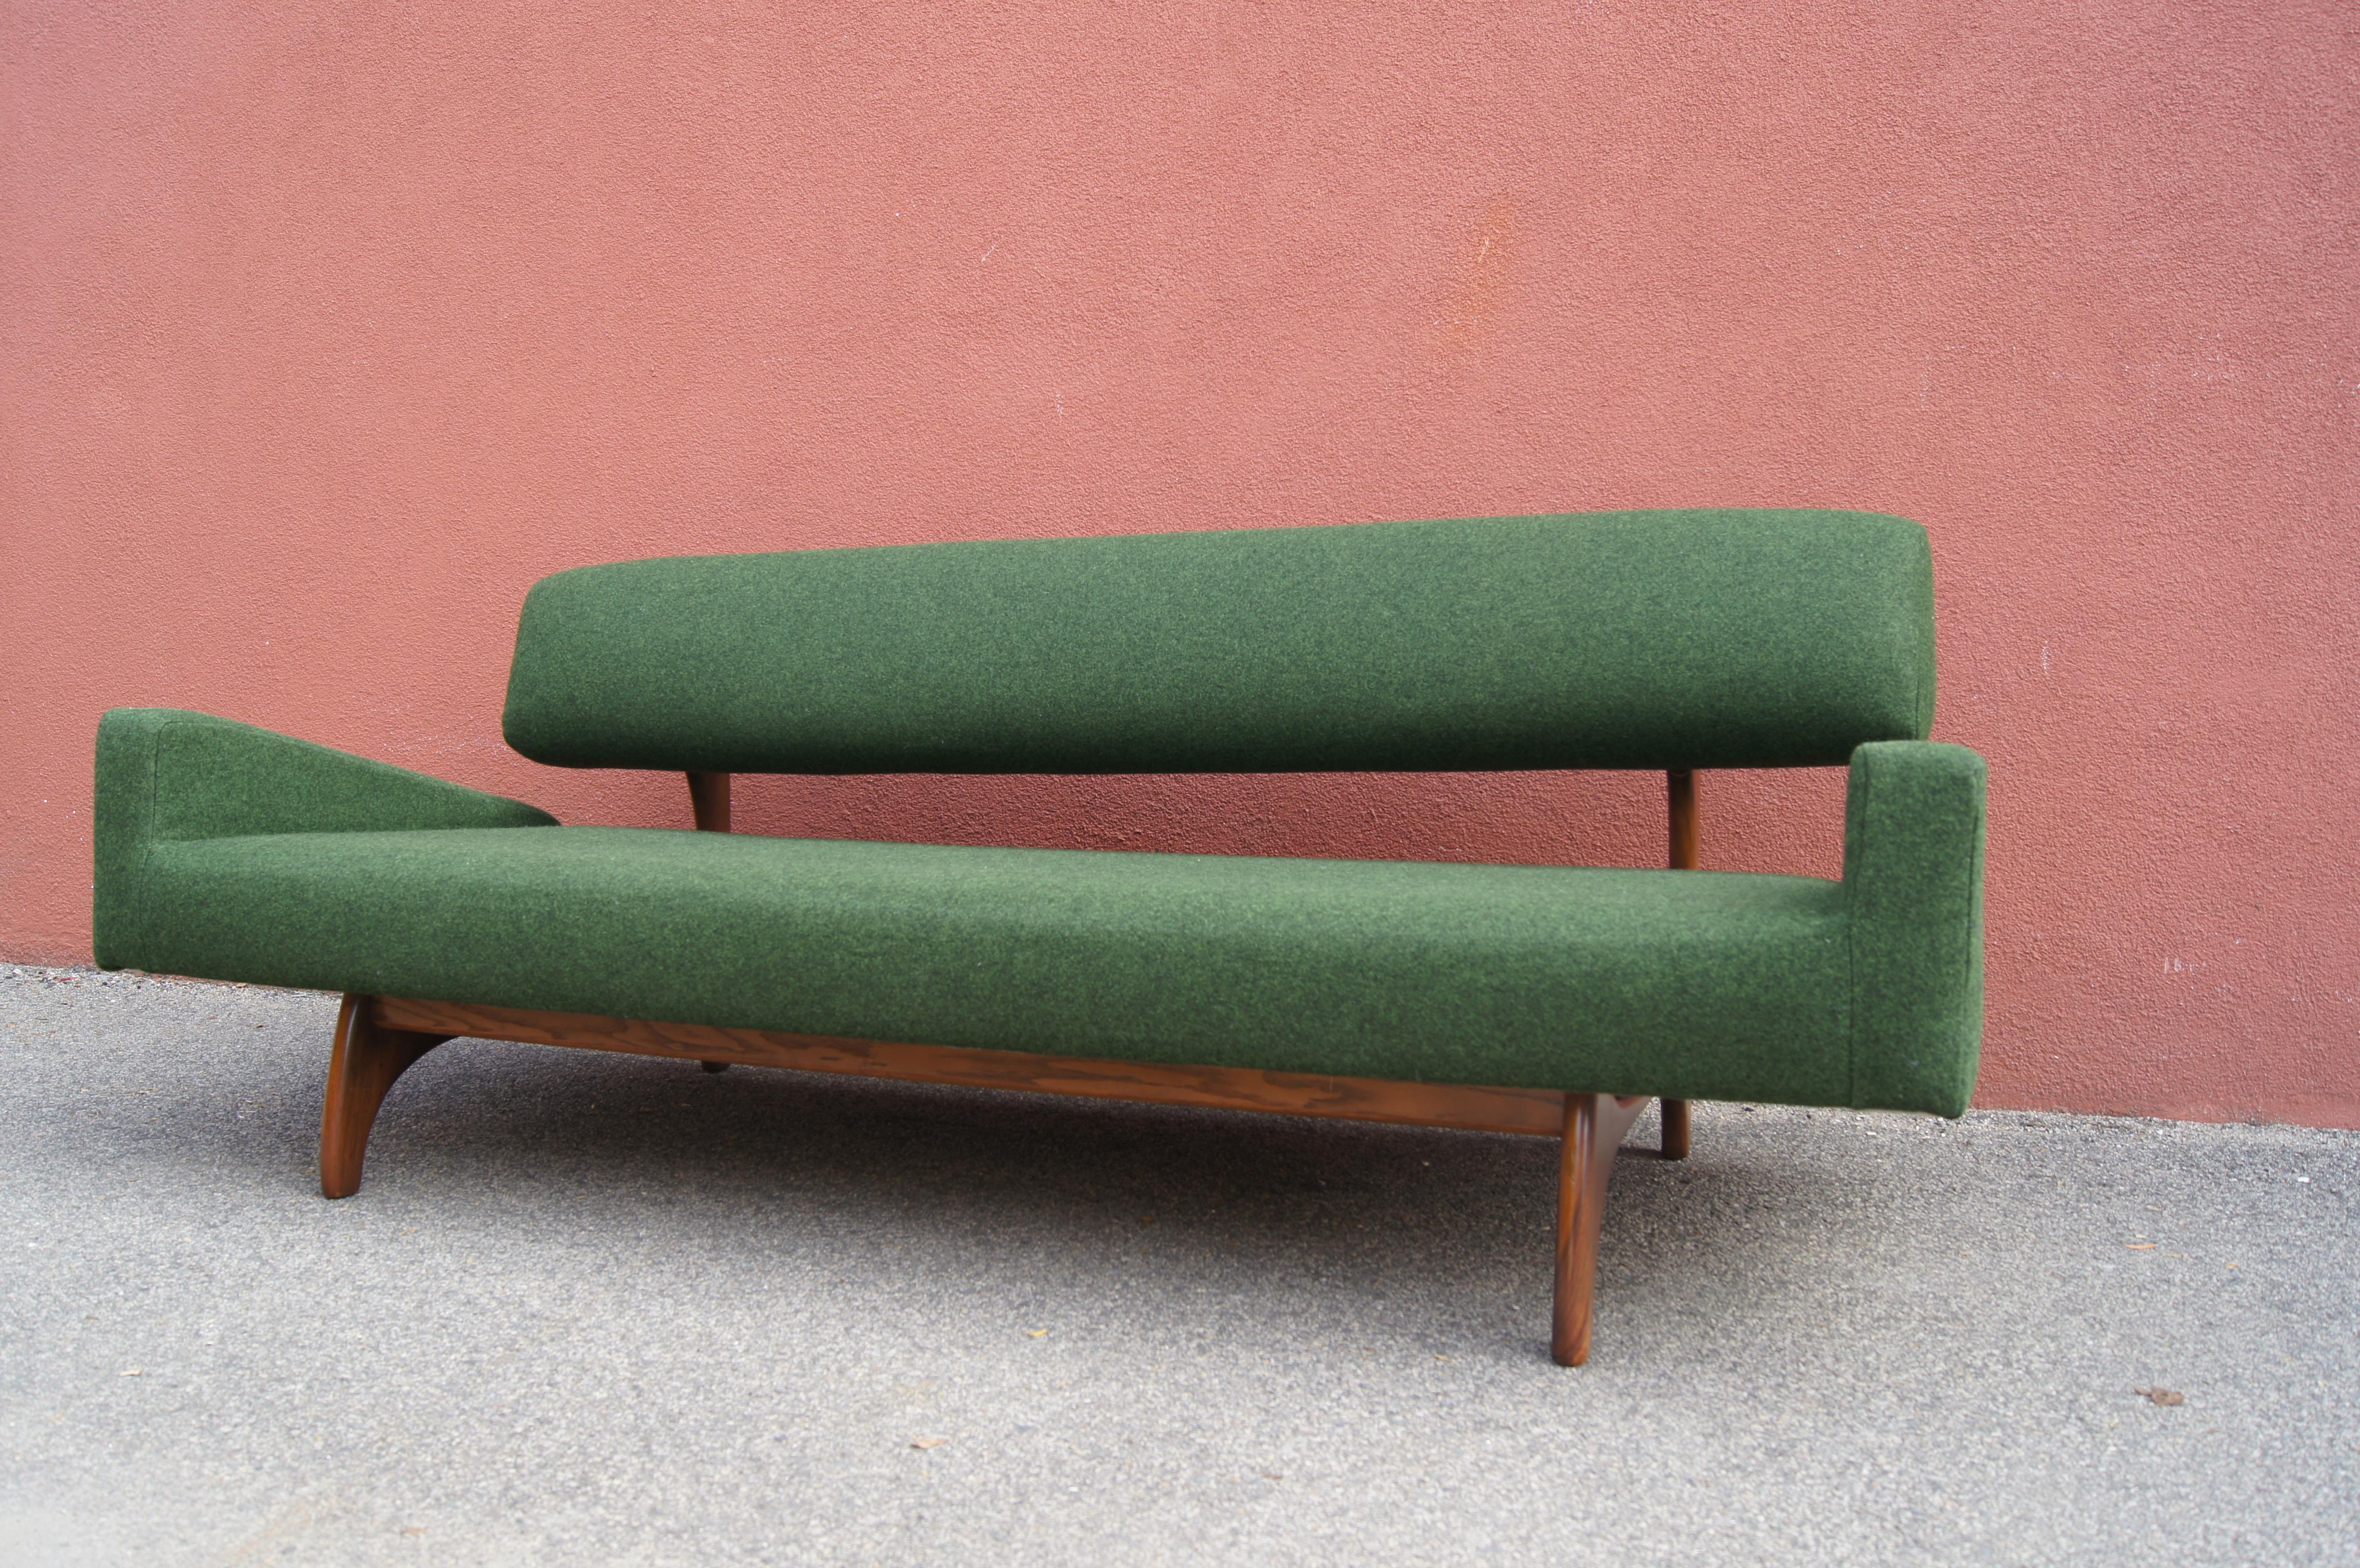 The exuberant lines of Adrian Pearsall's 829-S sofa for Craft Associates make for an eye-catching piece. A walnut frame with gently arced legs brackets a deep seat and bolster-like backrest. The forest green wool felt of the new upholstery (Maharam